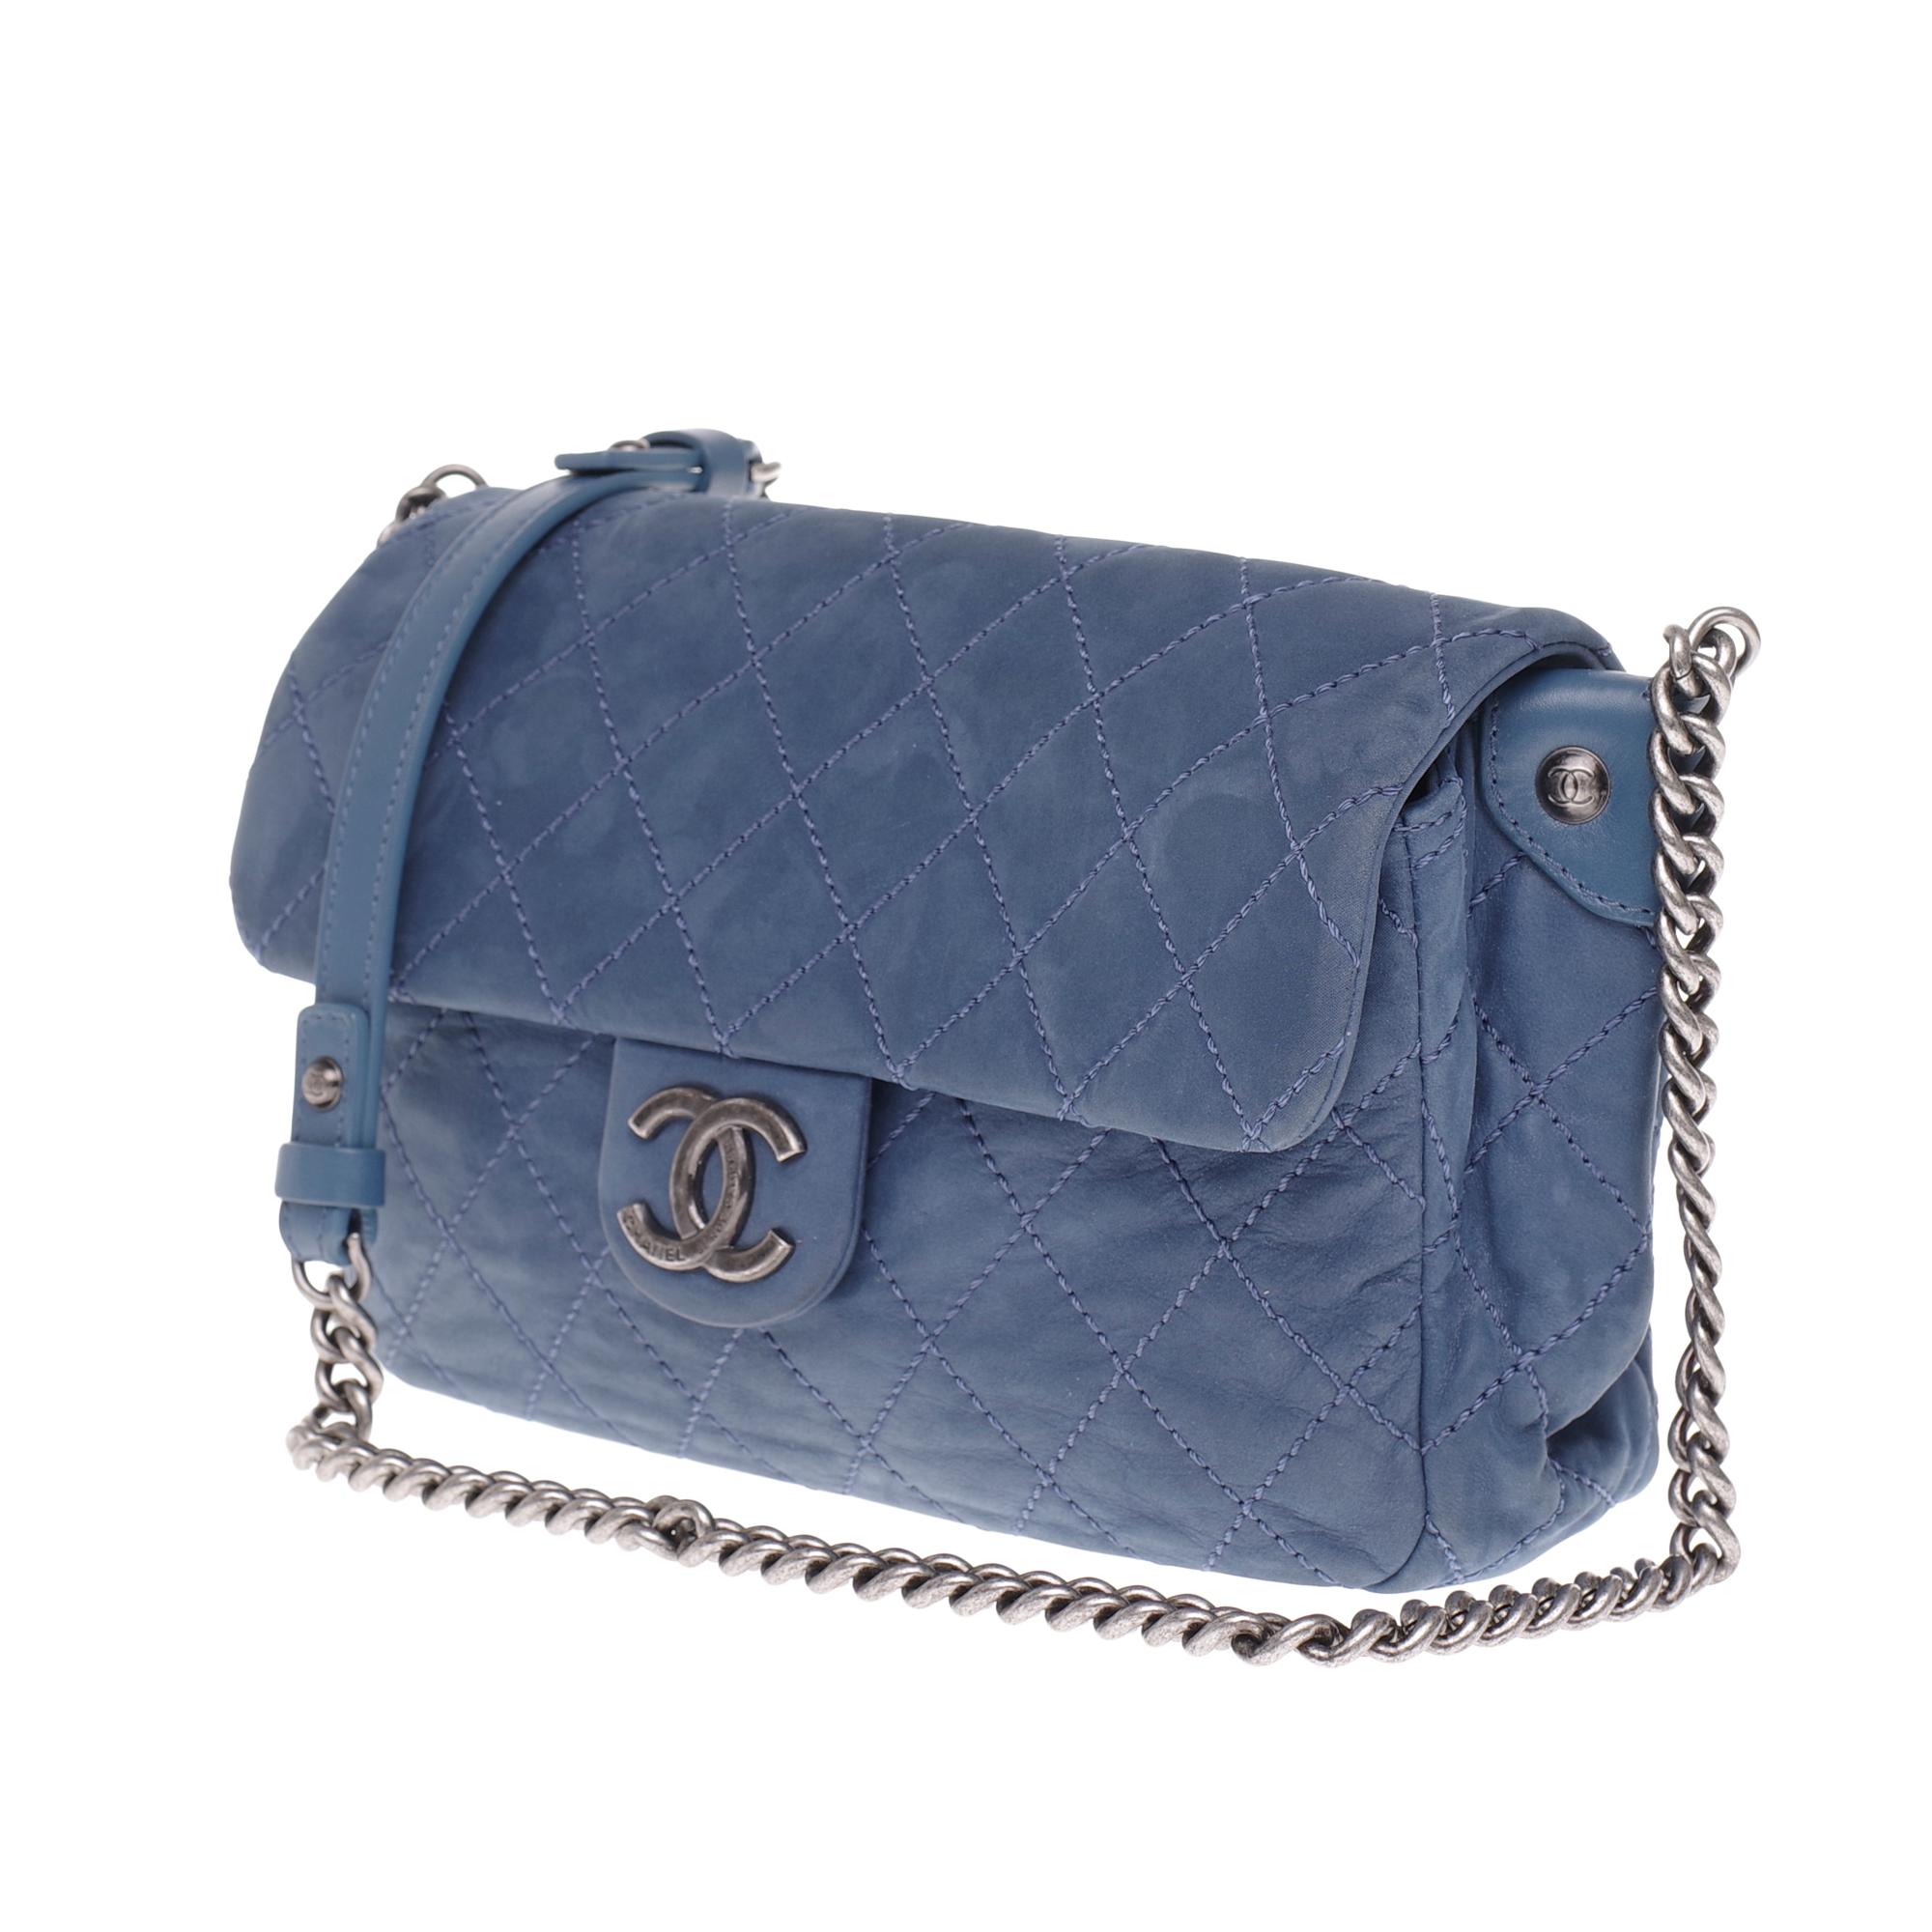 Gray Chanel Classic shoulder bag in blue quilted leather and silver hardware